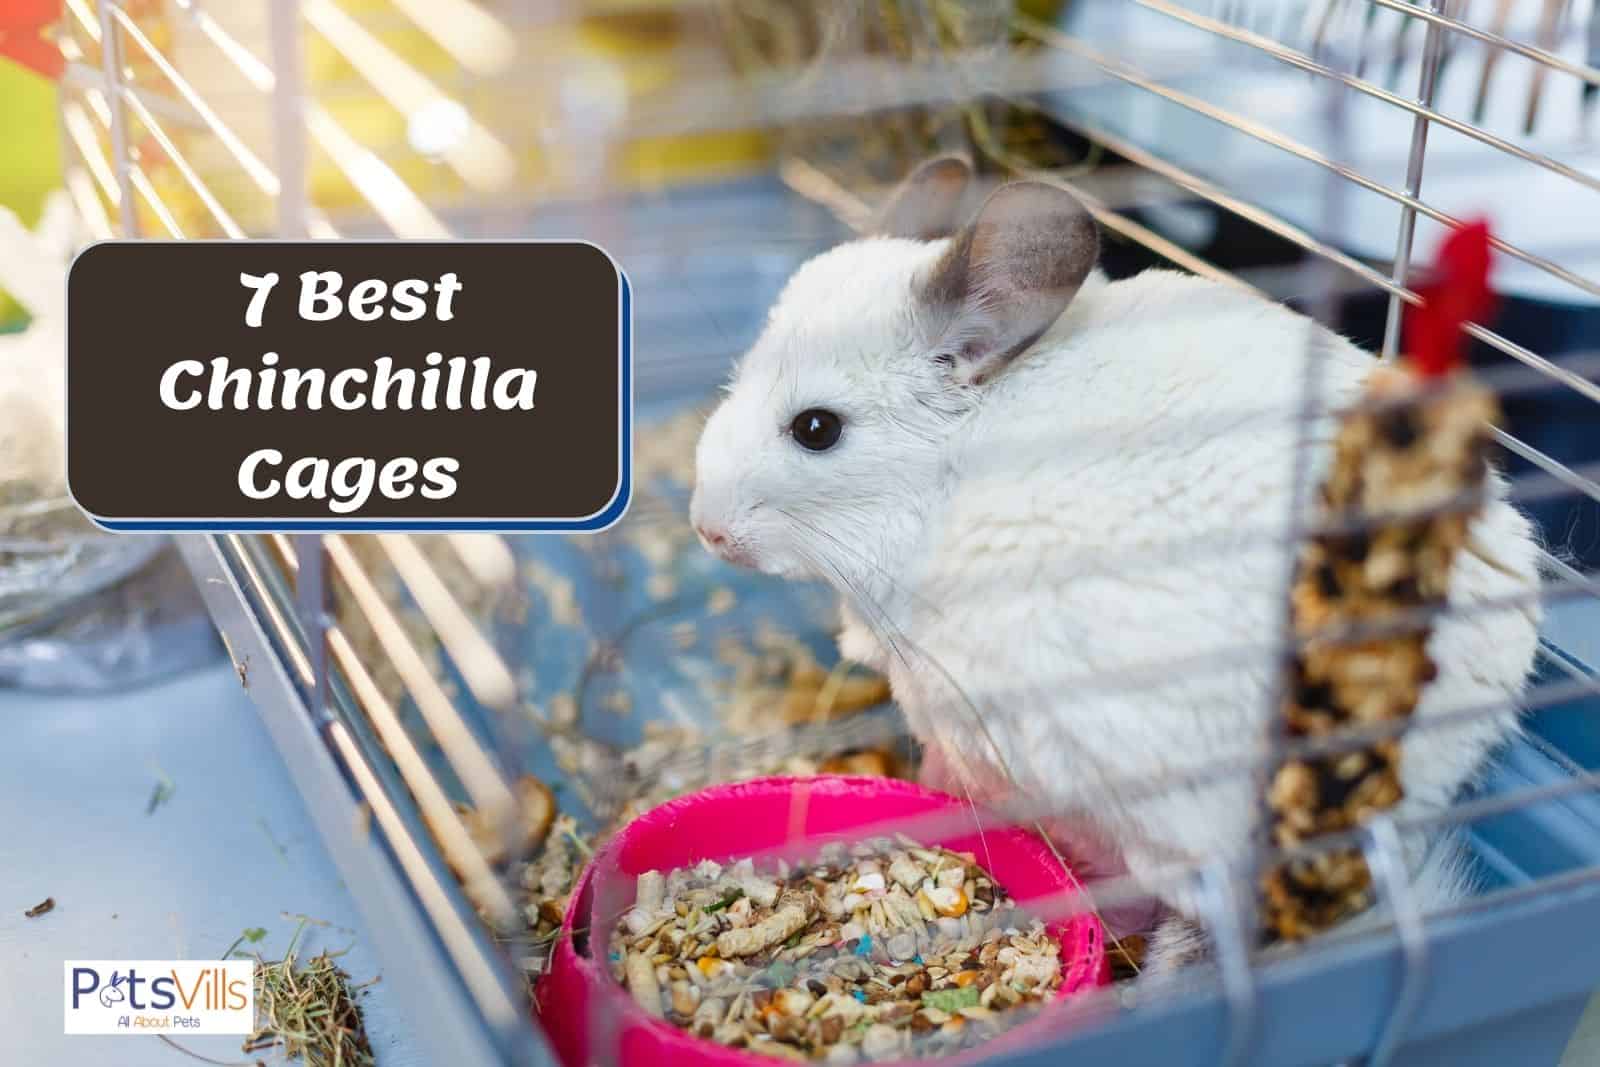 a white chinchilla in her best chinchilla cages